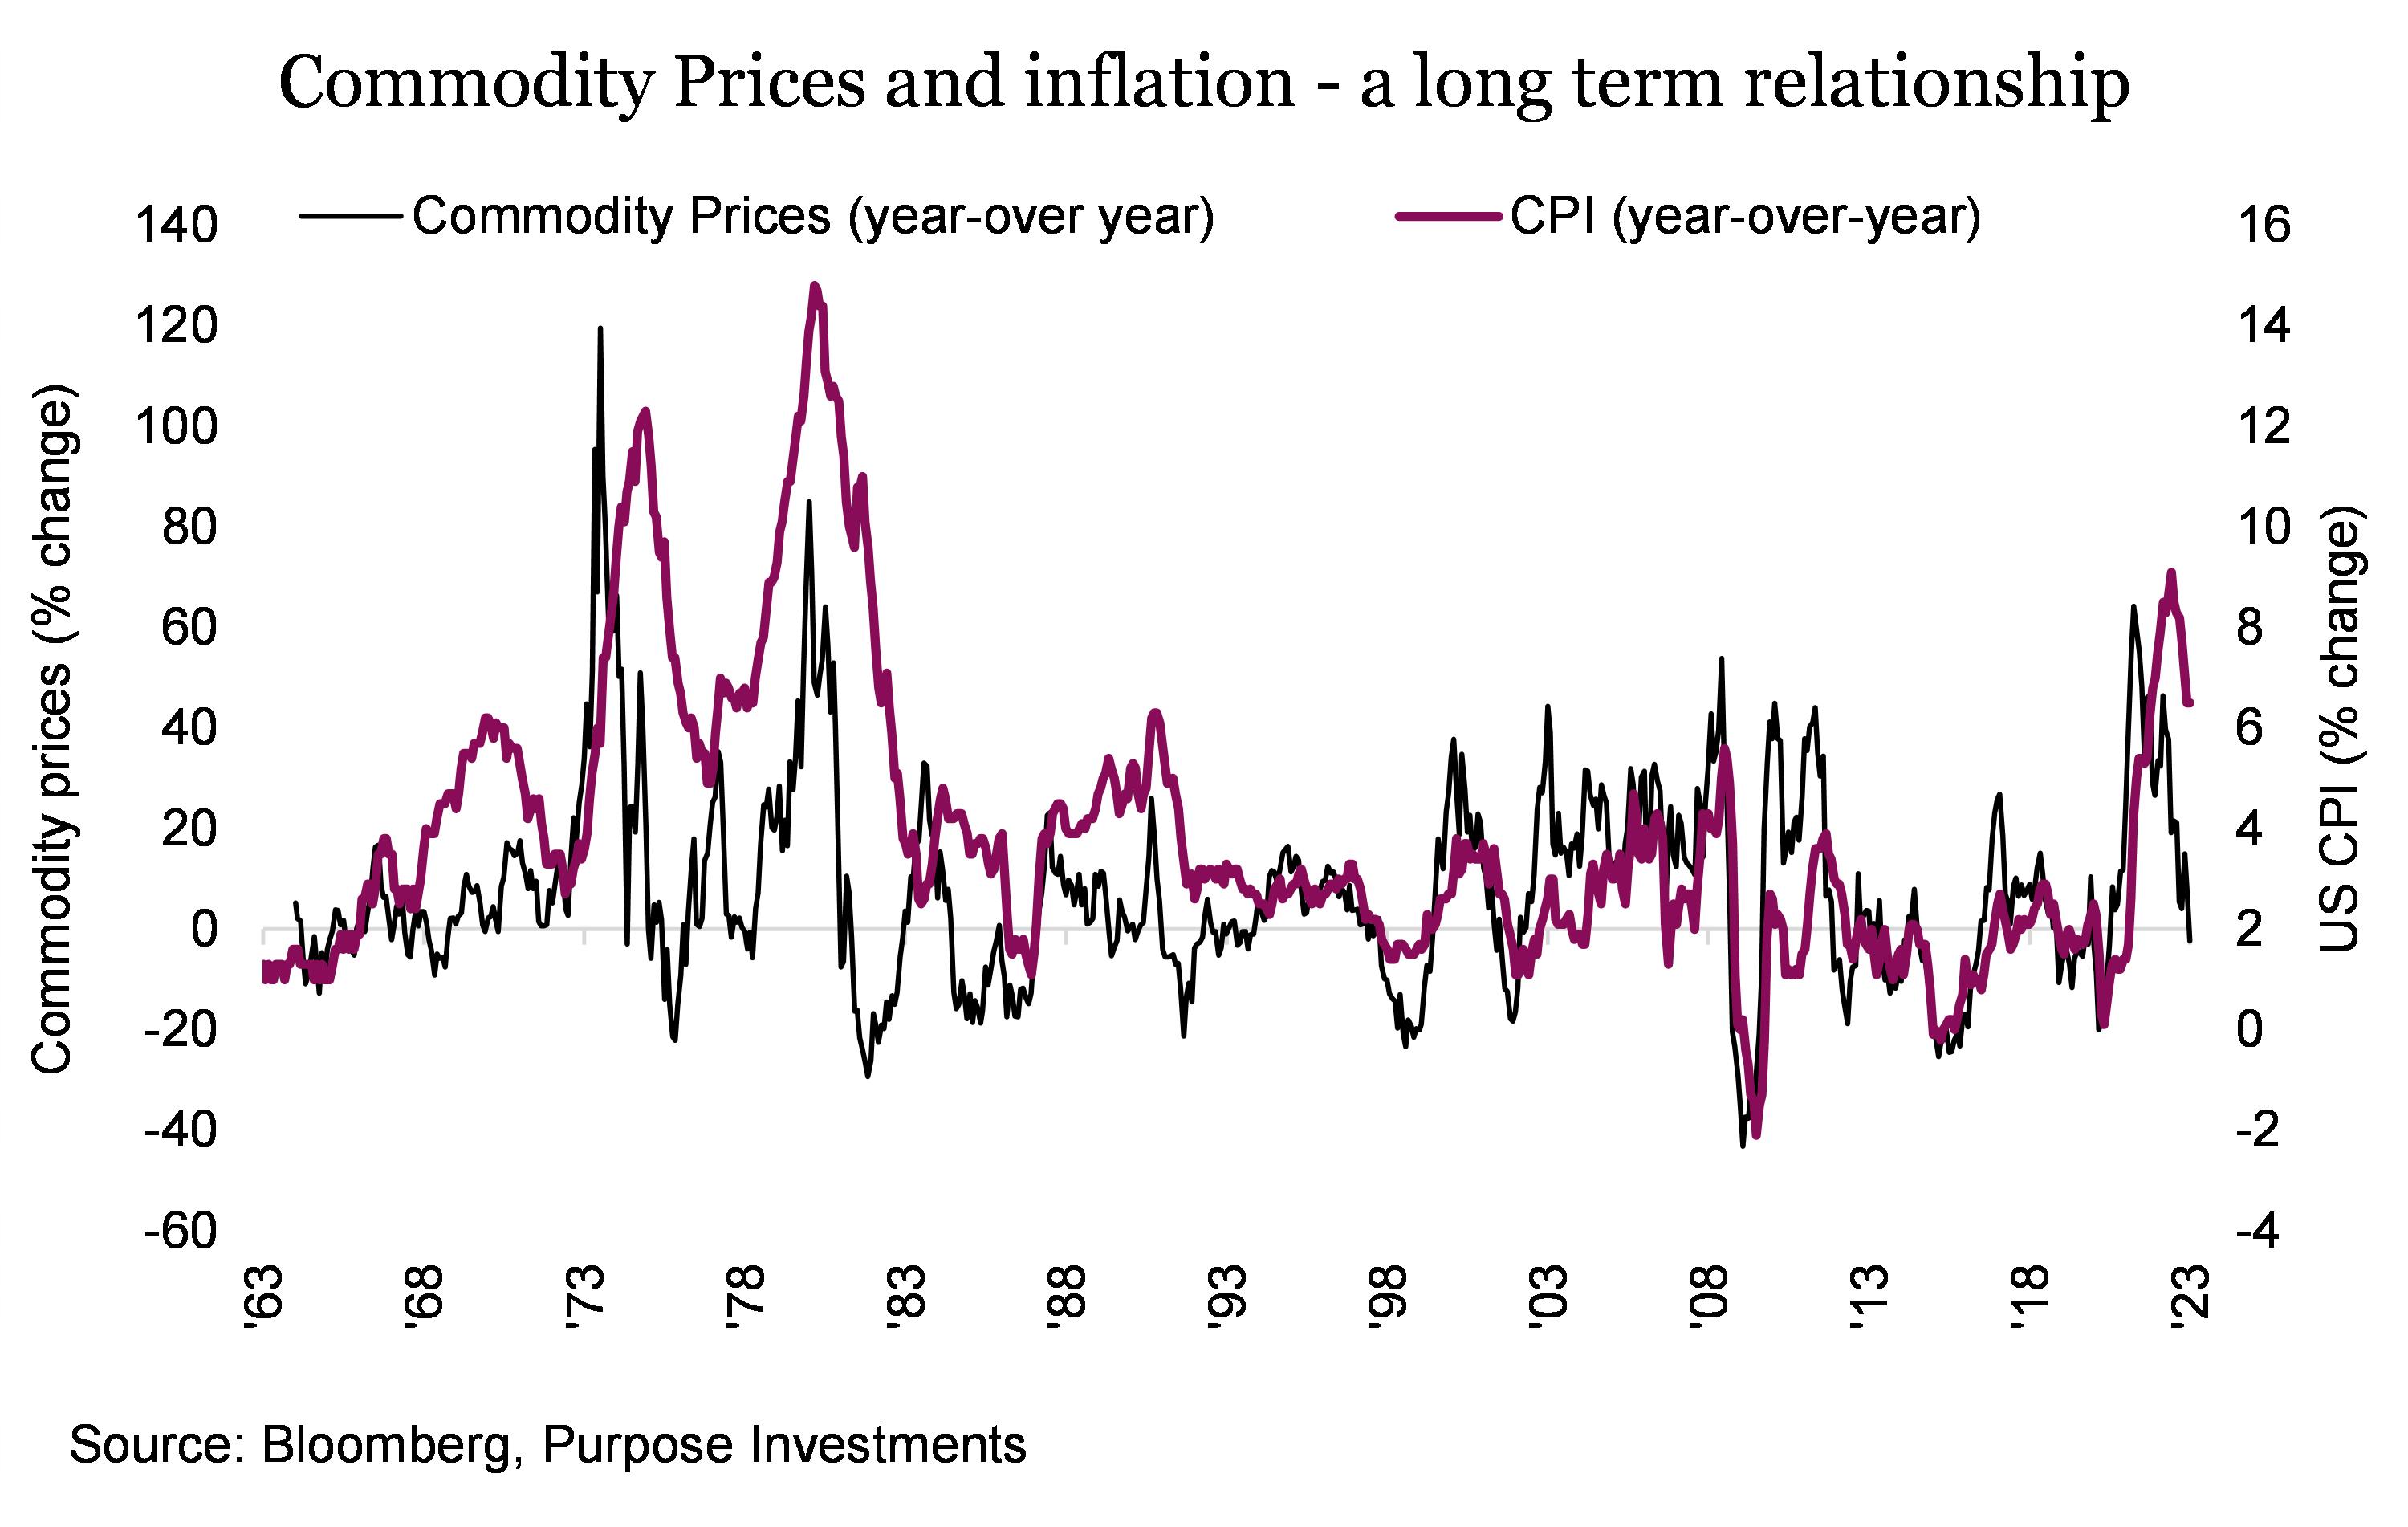 Commodity Prices and inflation - a long term relationship